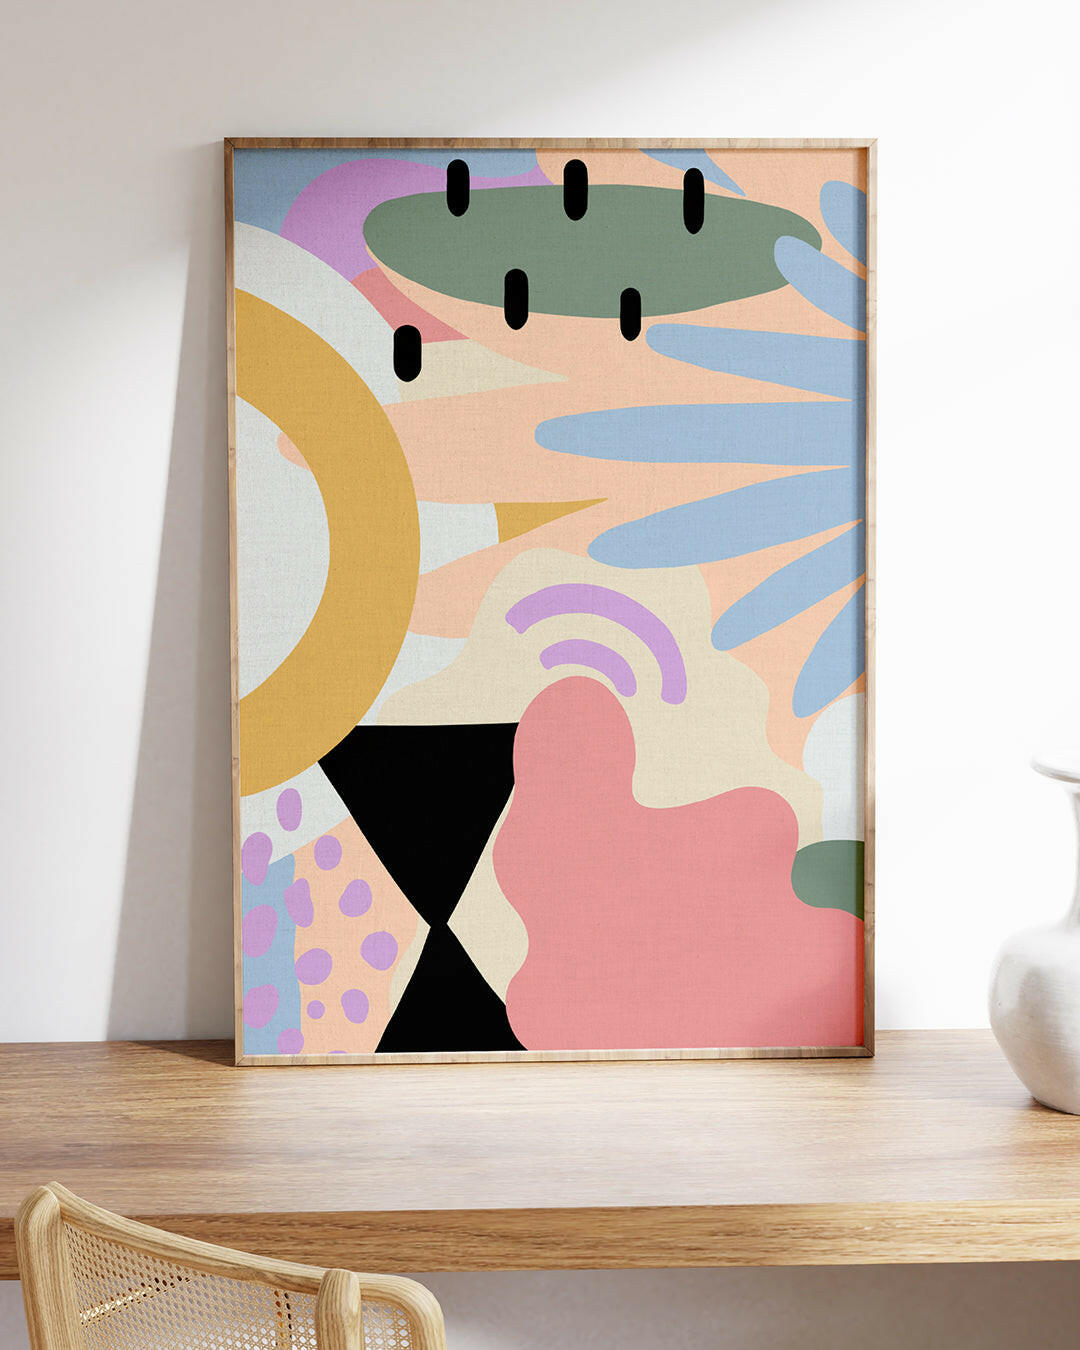 Abstract tropical paradise art print with vibrant colors.